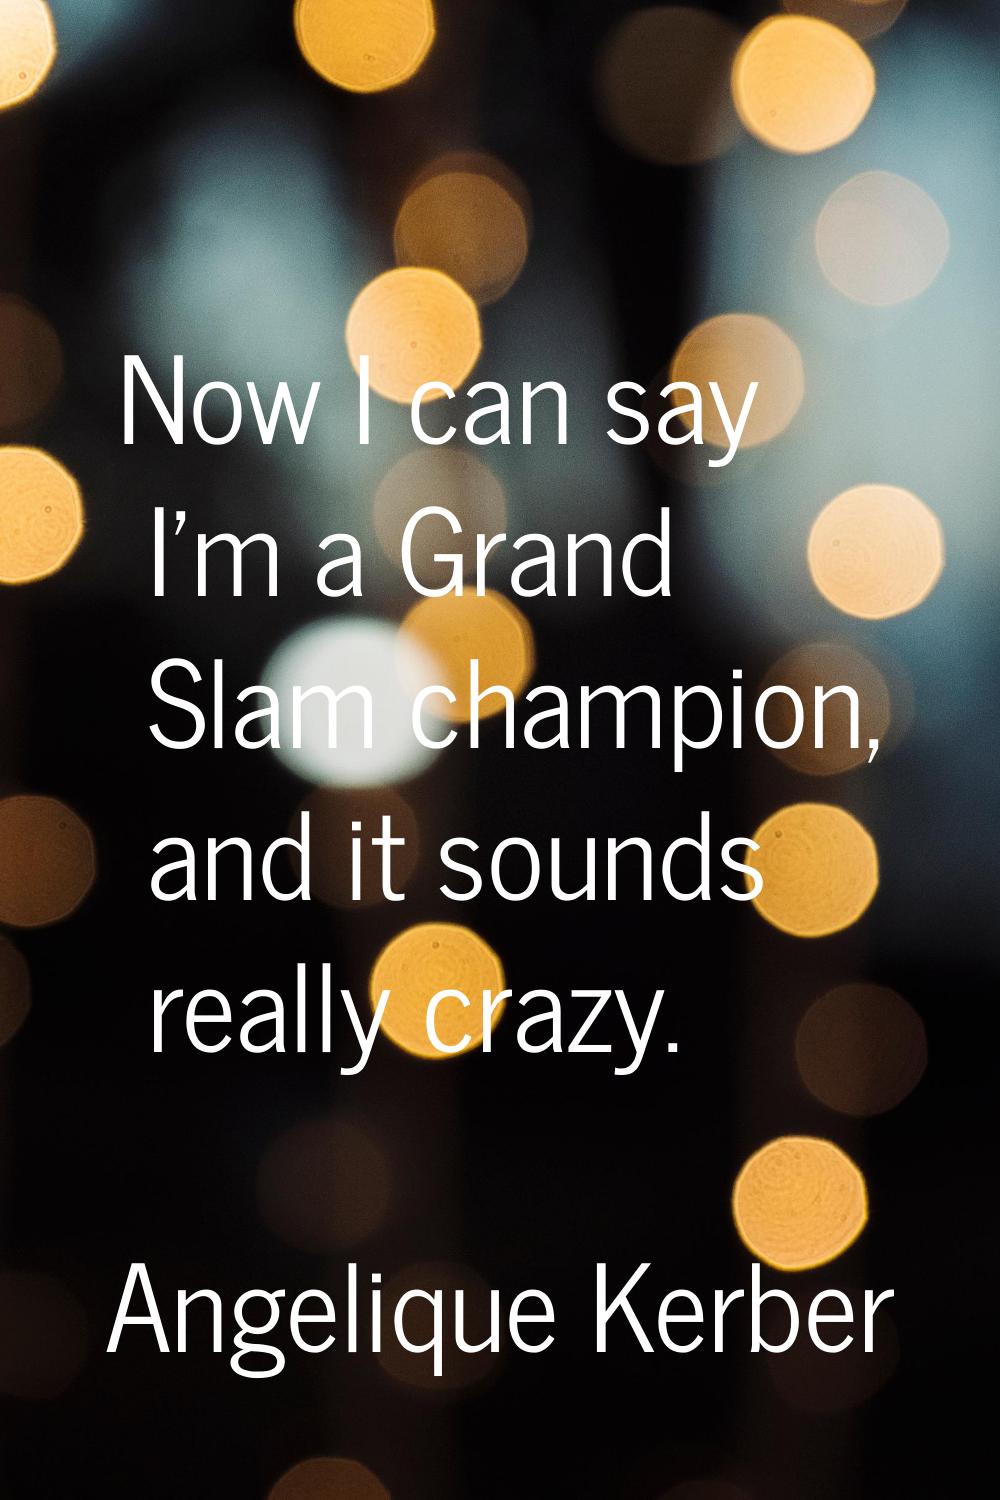 Now I can say I'm a Grand Slam champion, and it sounds really crazy.